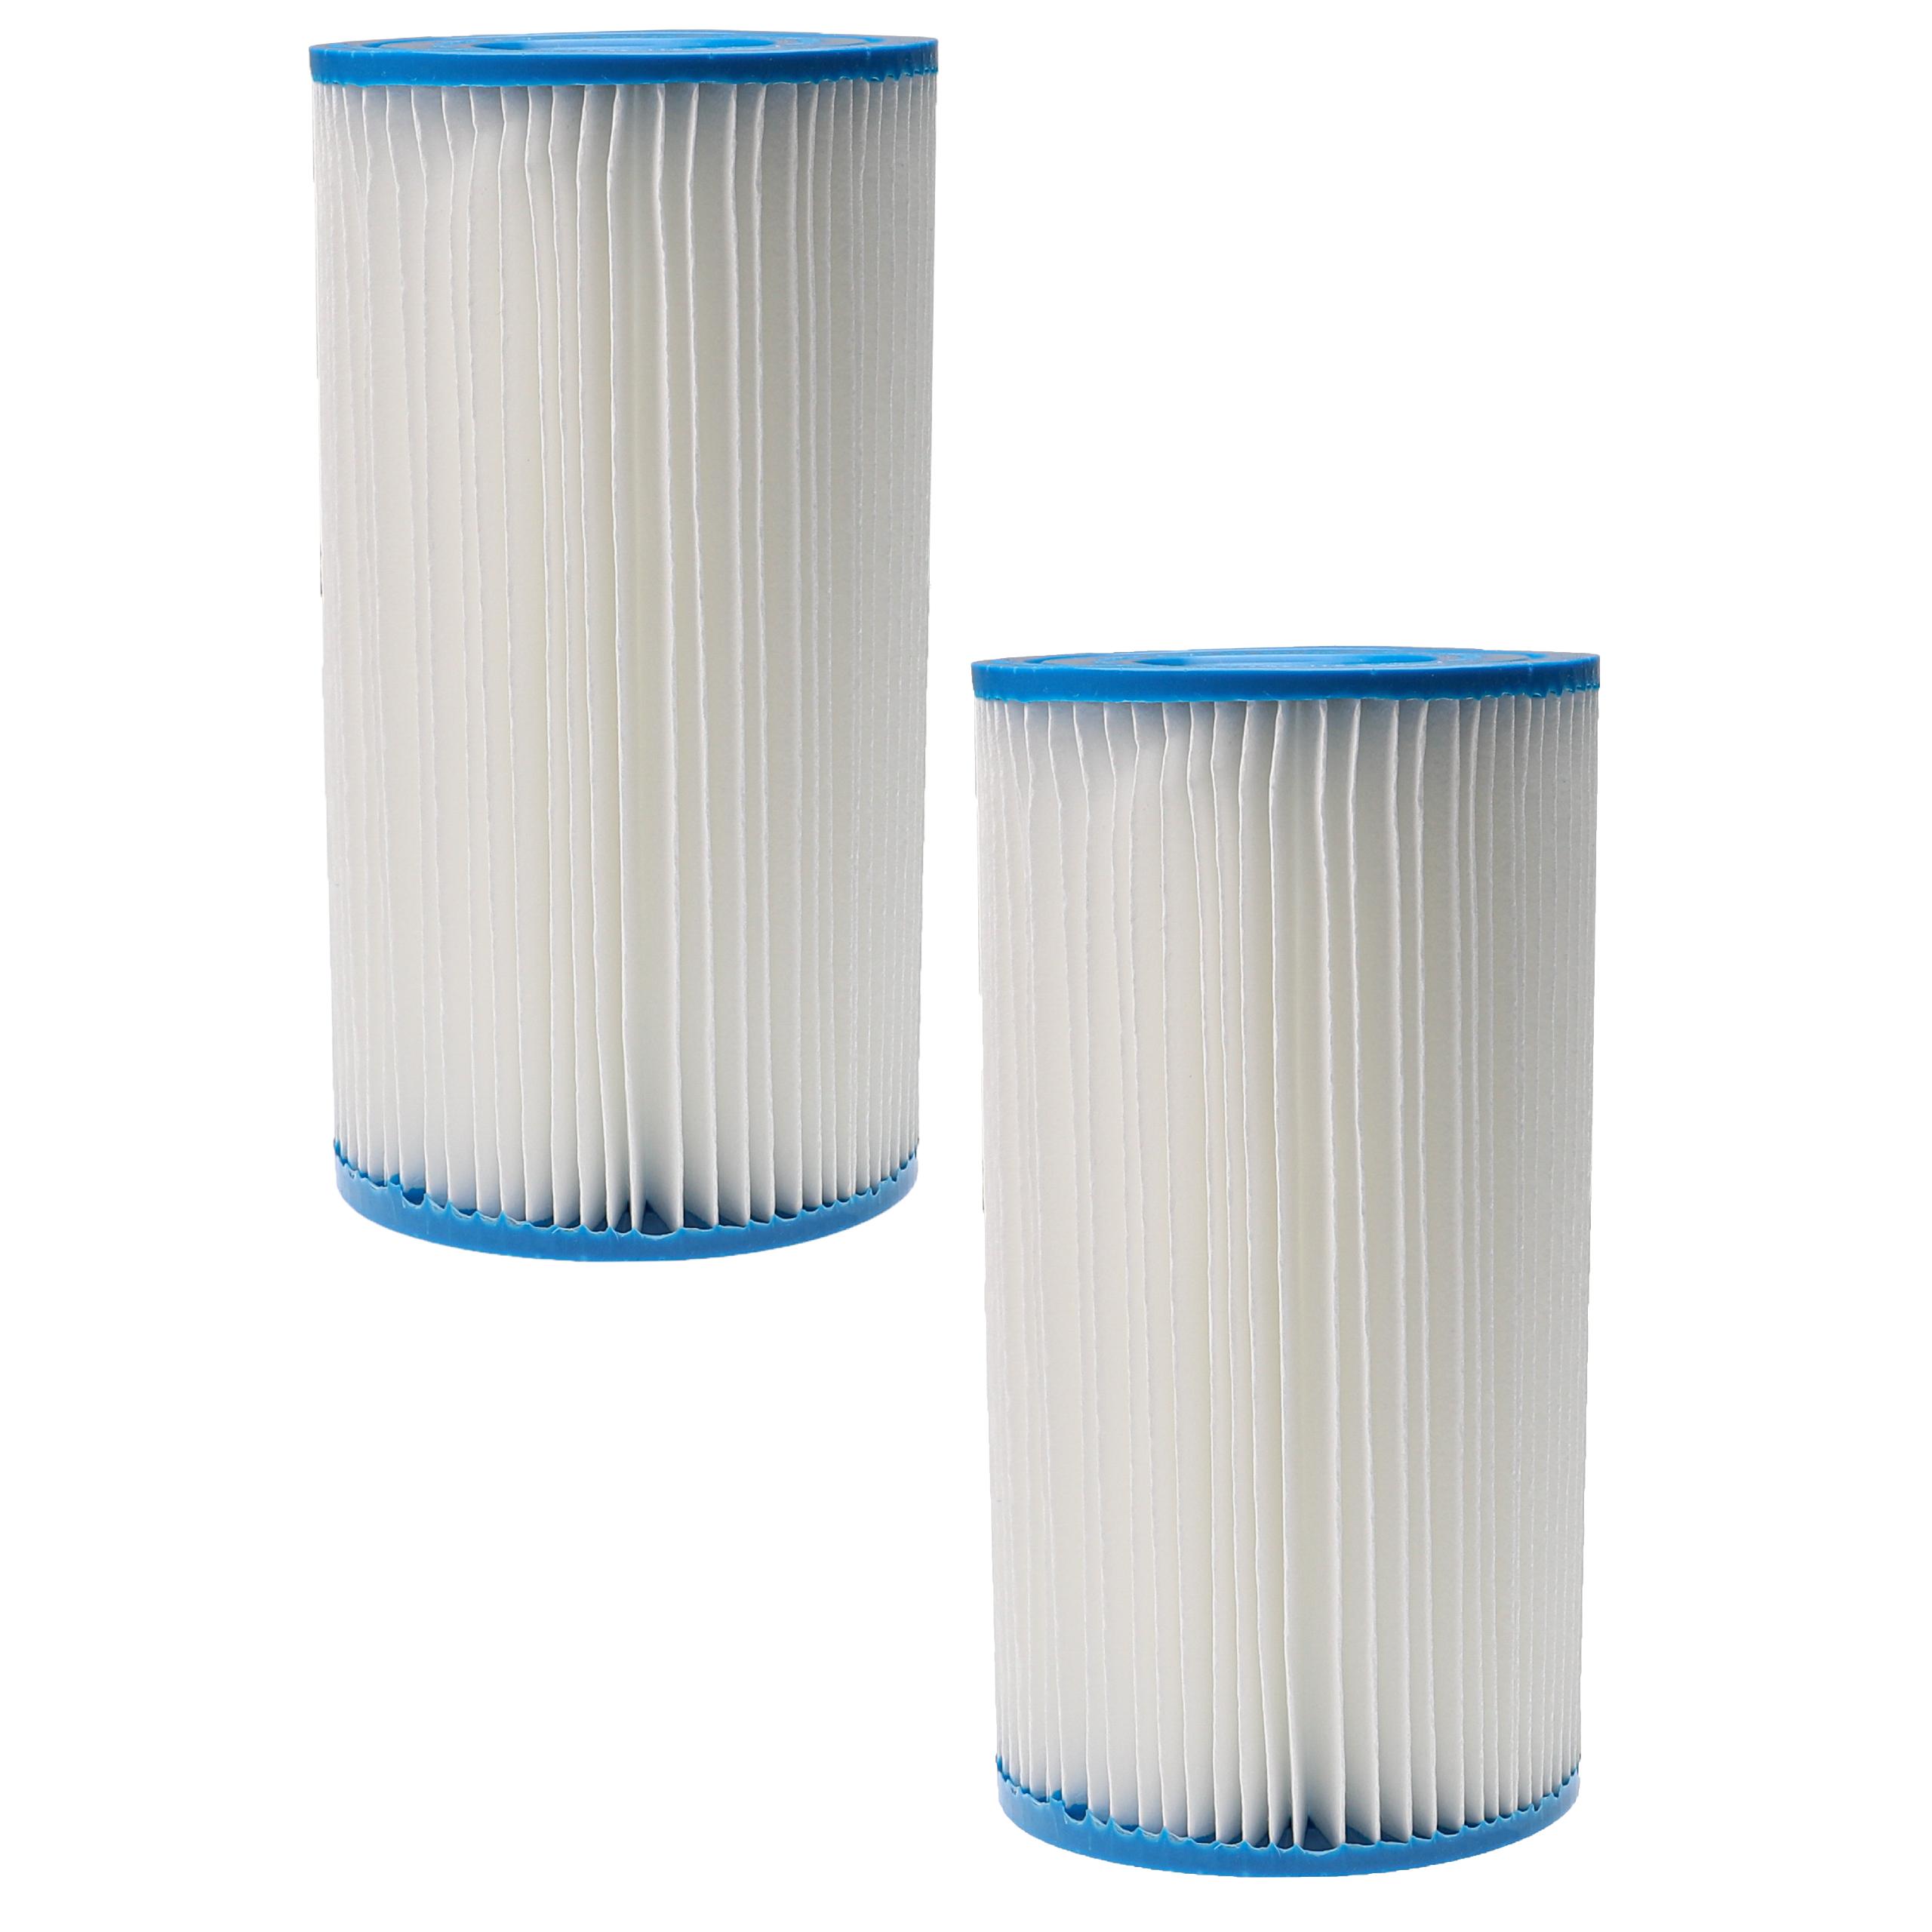  2x Filter Cartridge replaces Intex filter type A for Intex Swimming Pool, Filter Pump - Blue White